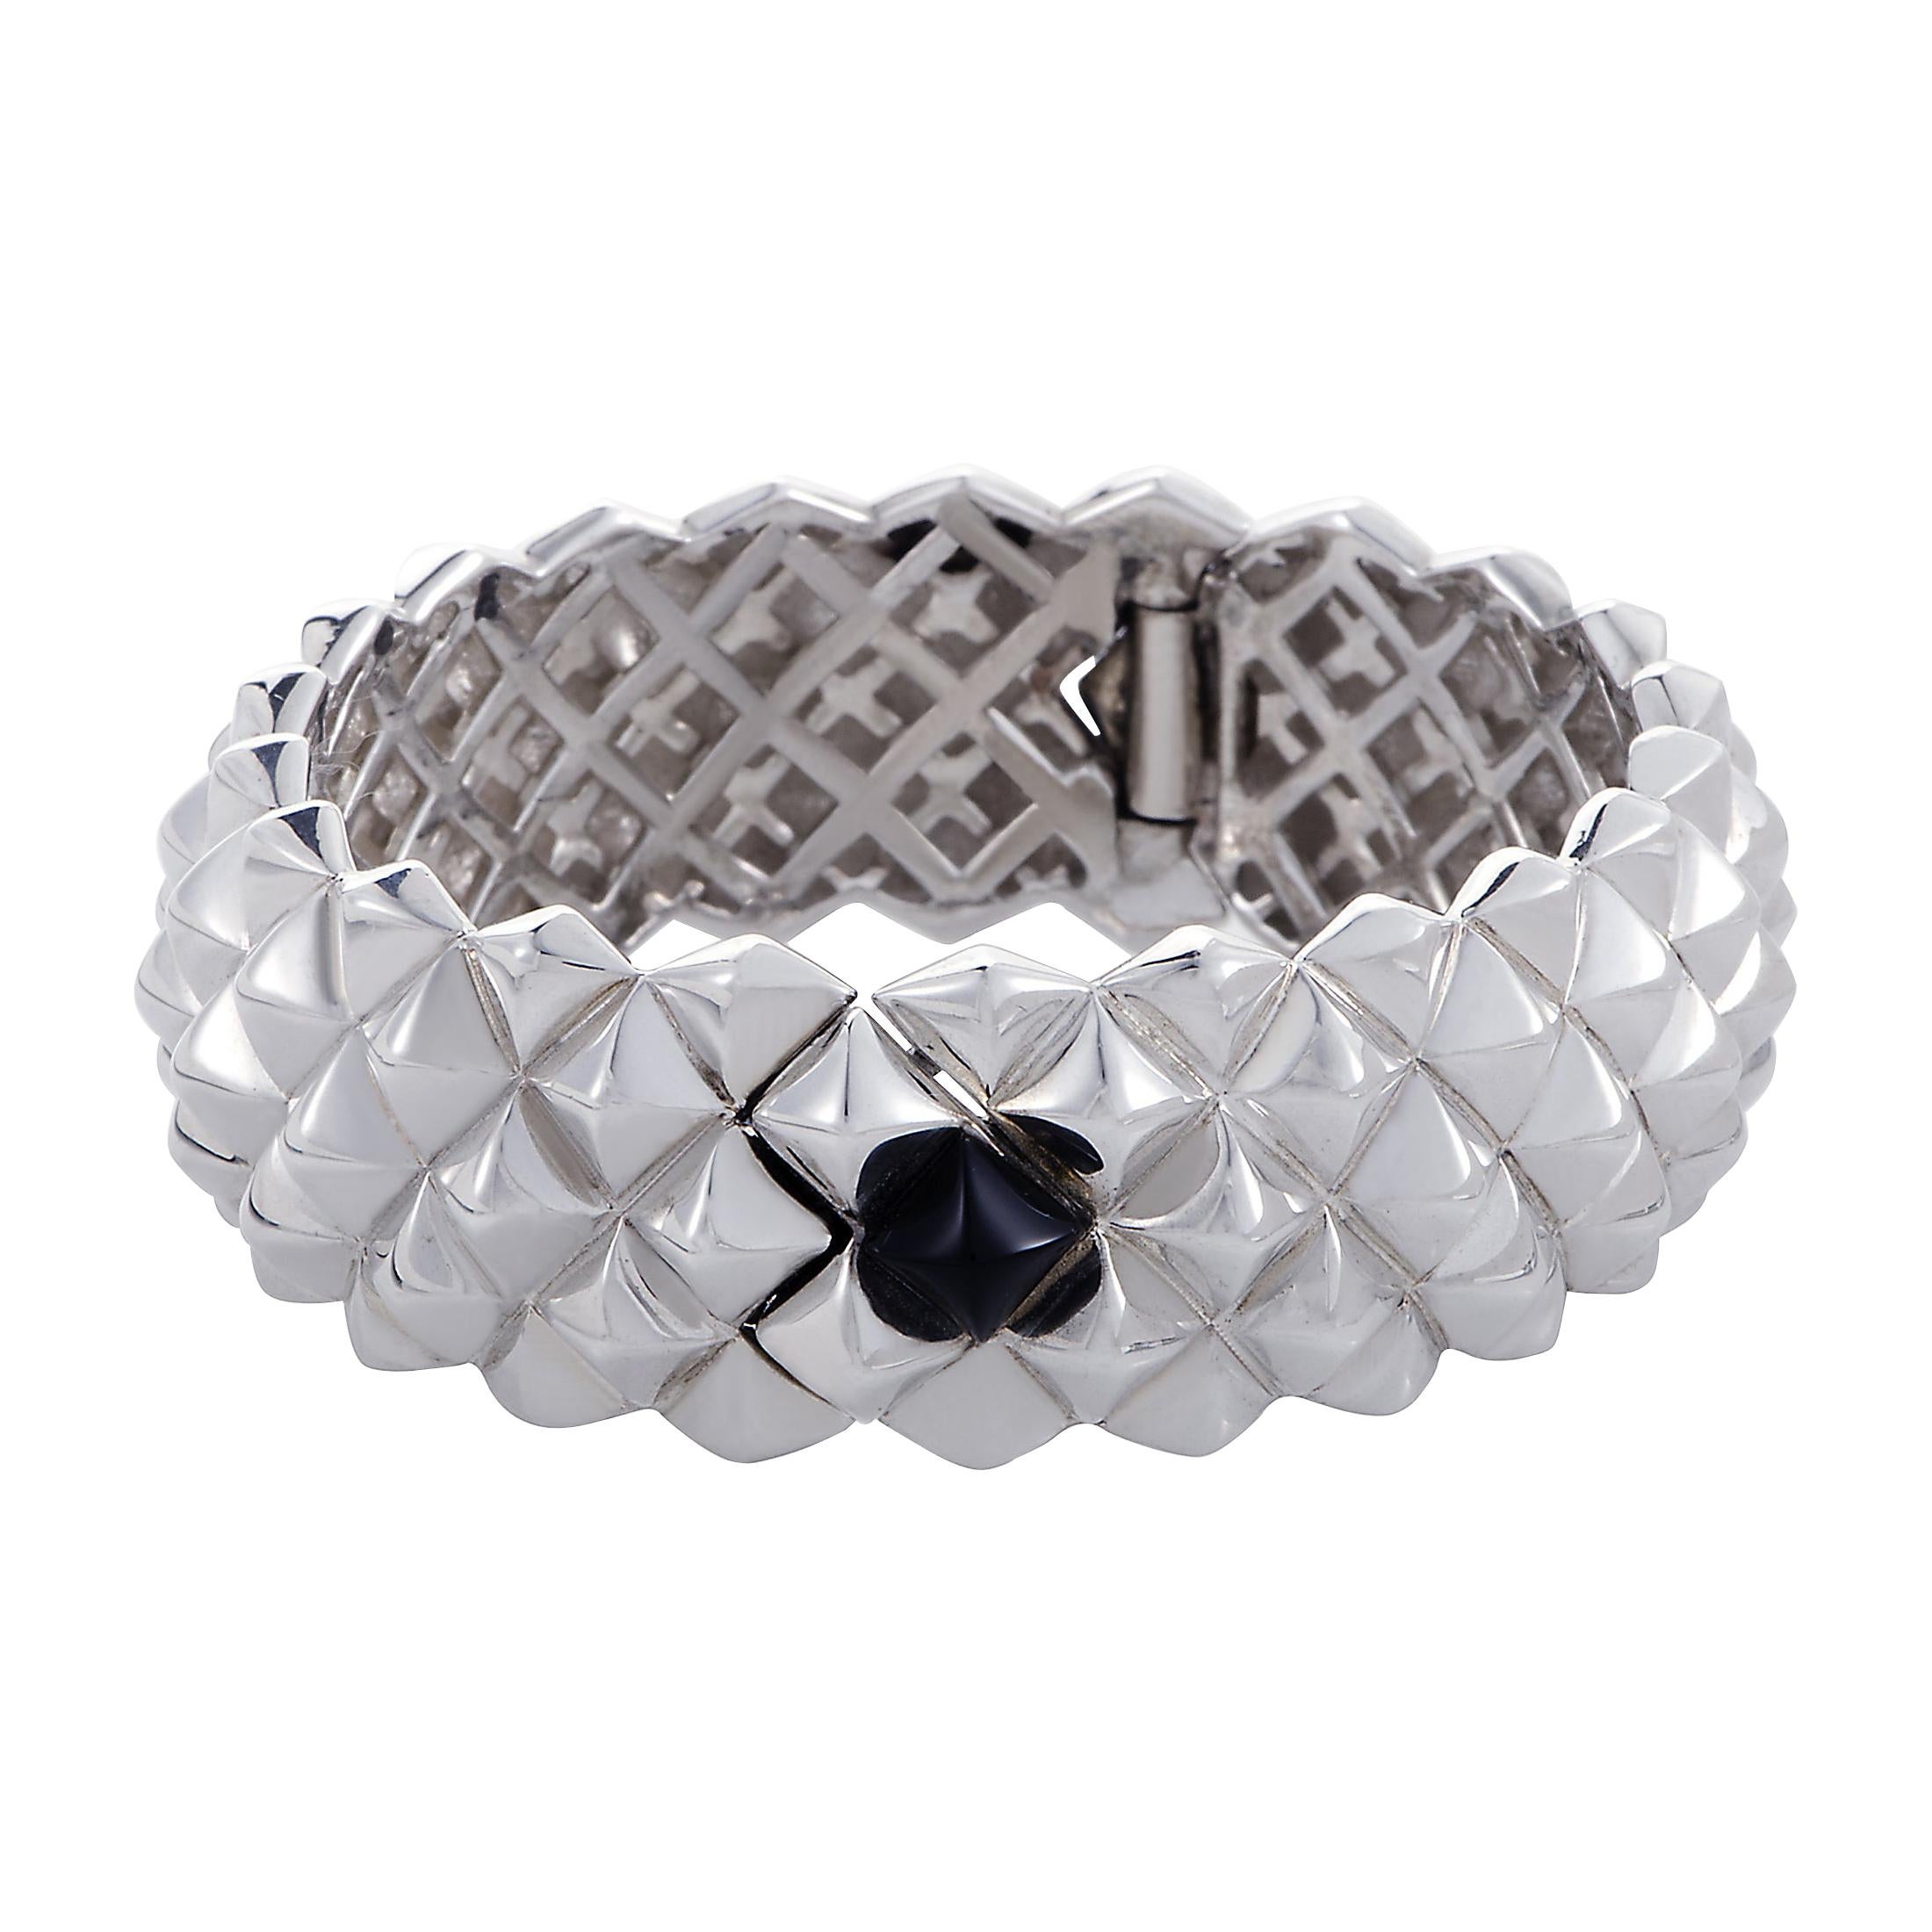 Stephen Webster Superstud Silver and Onyx Hinged Cuff Bracelet